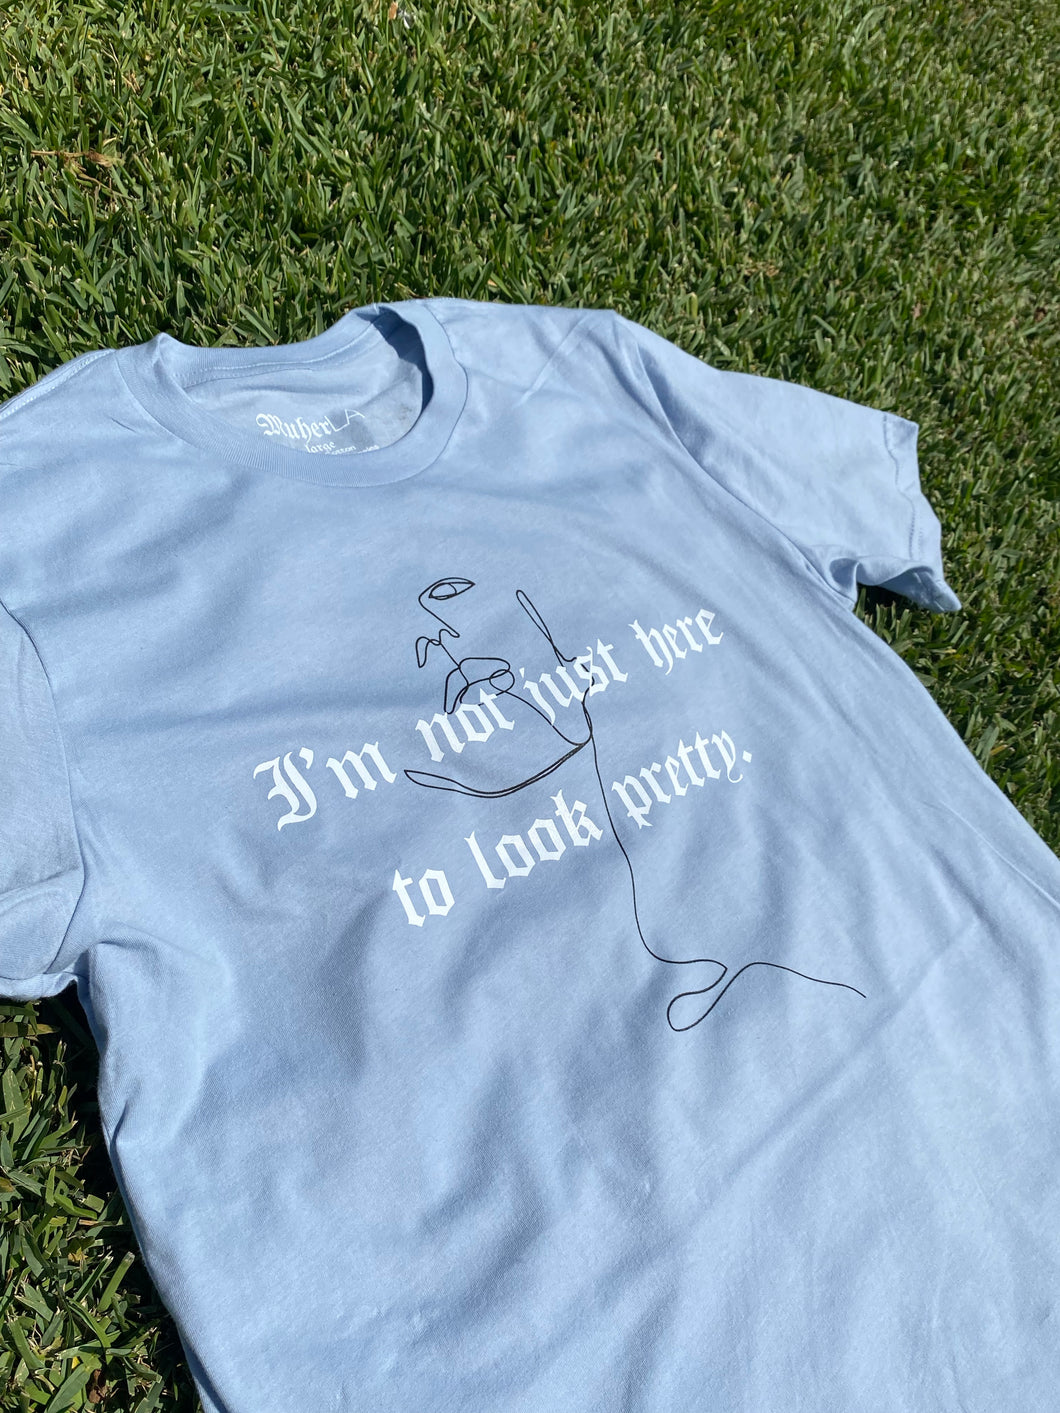 I'm Not Just Here to Look Pretty T-Shirt : Light Blue